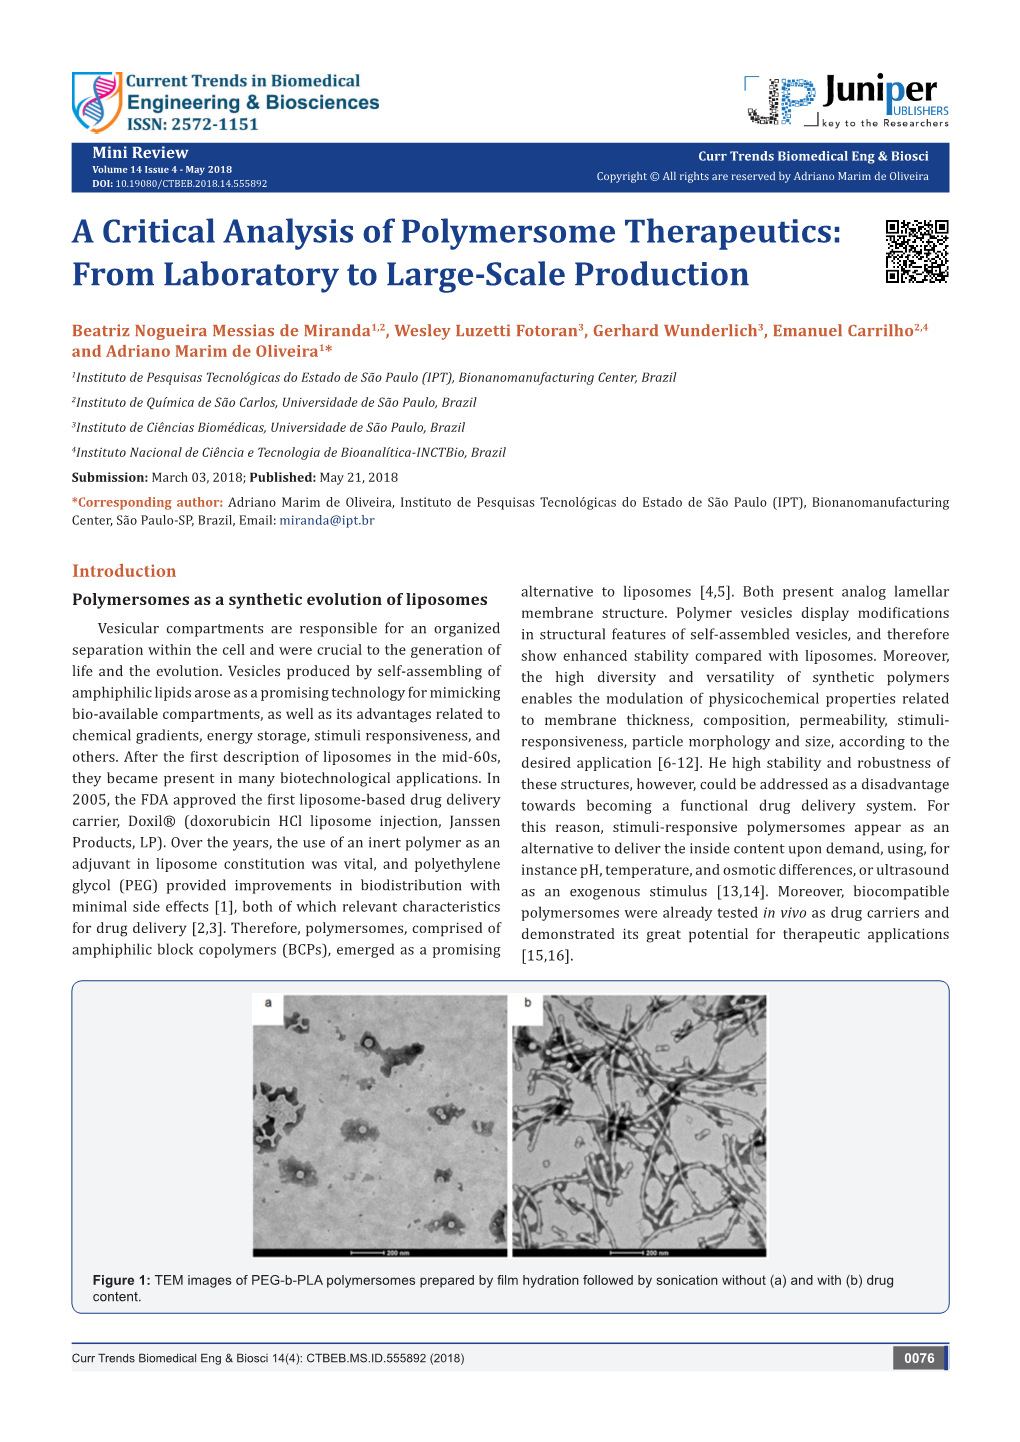 A Critical Analysis of Polymersome Therapeutics: from Laboratory to Large-Scale Production